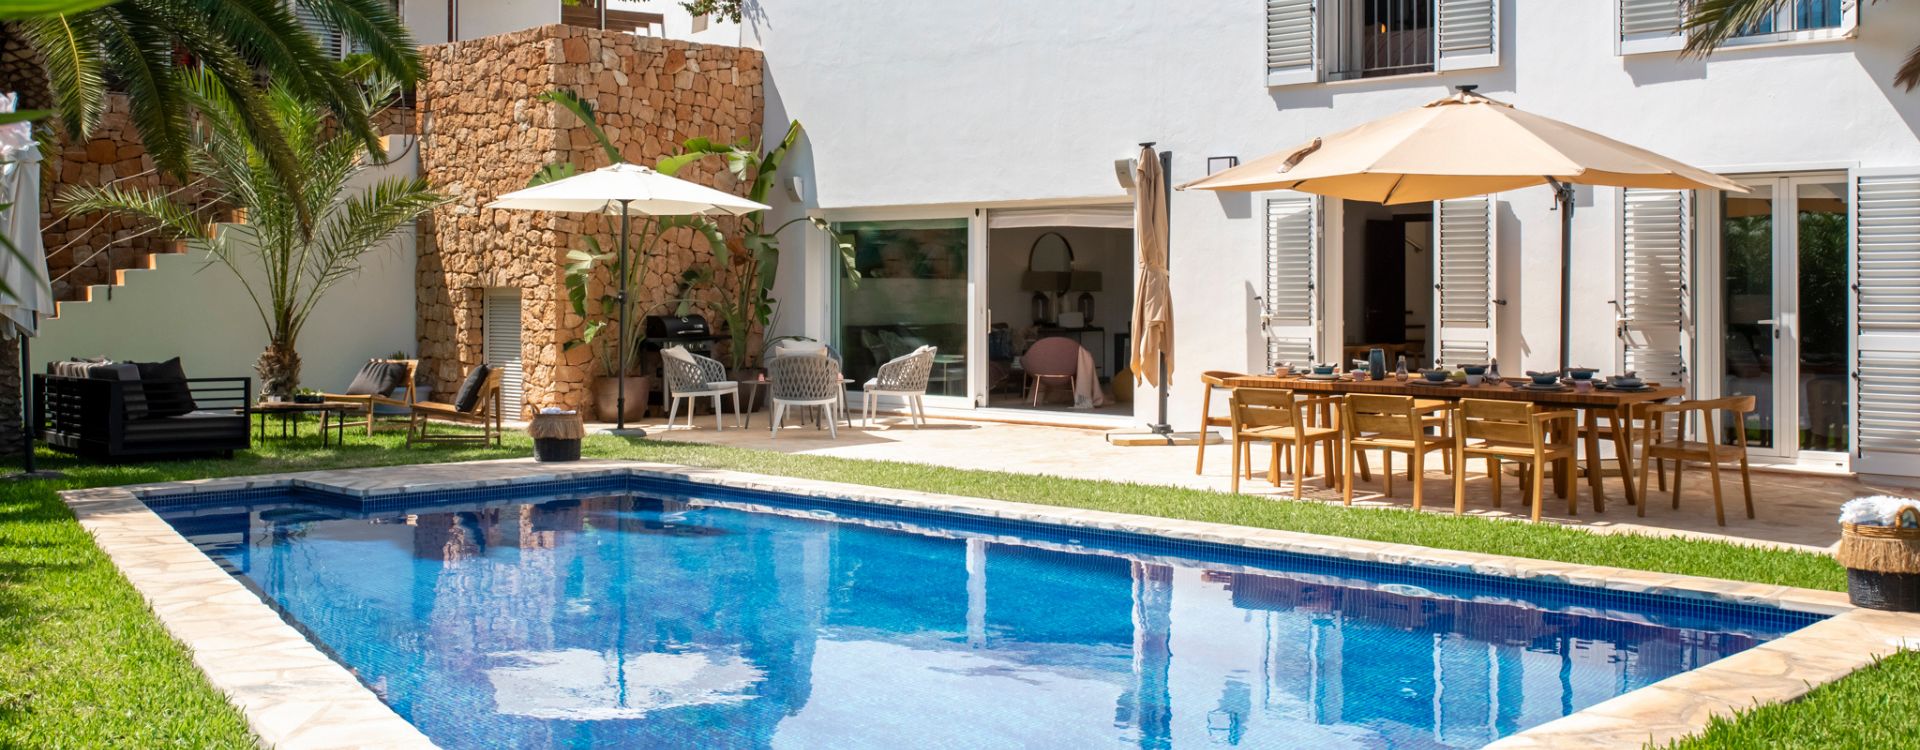 Luxurious holiday home in Cap Martinet, Villa Natalie. 